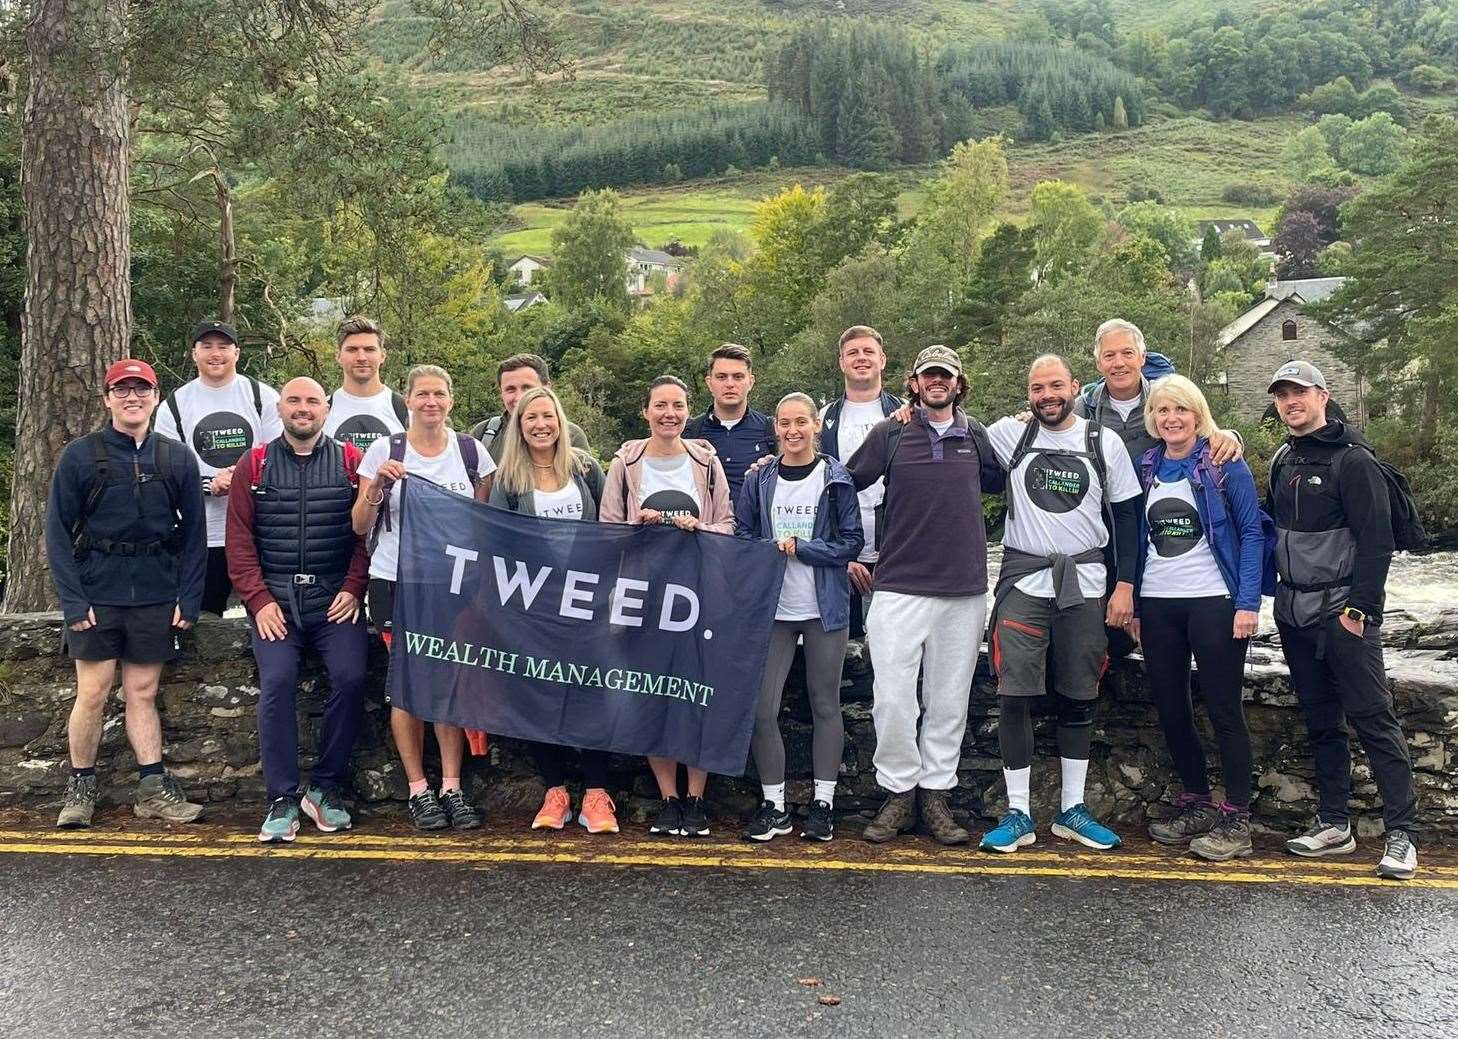 Team Tweed take part in an annual charity event by carrying out a variety of challenges.